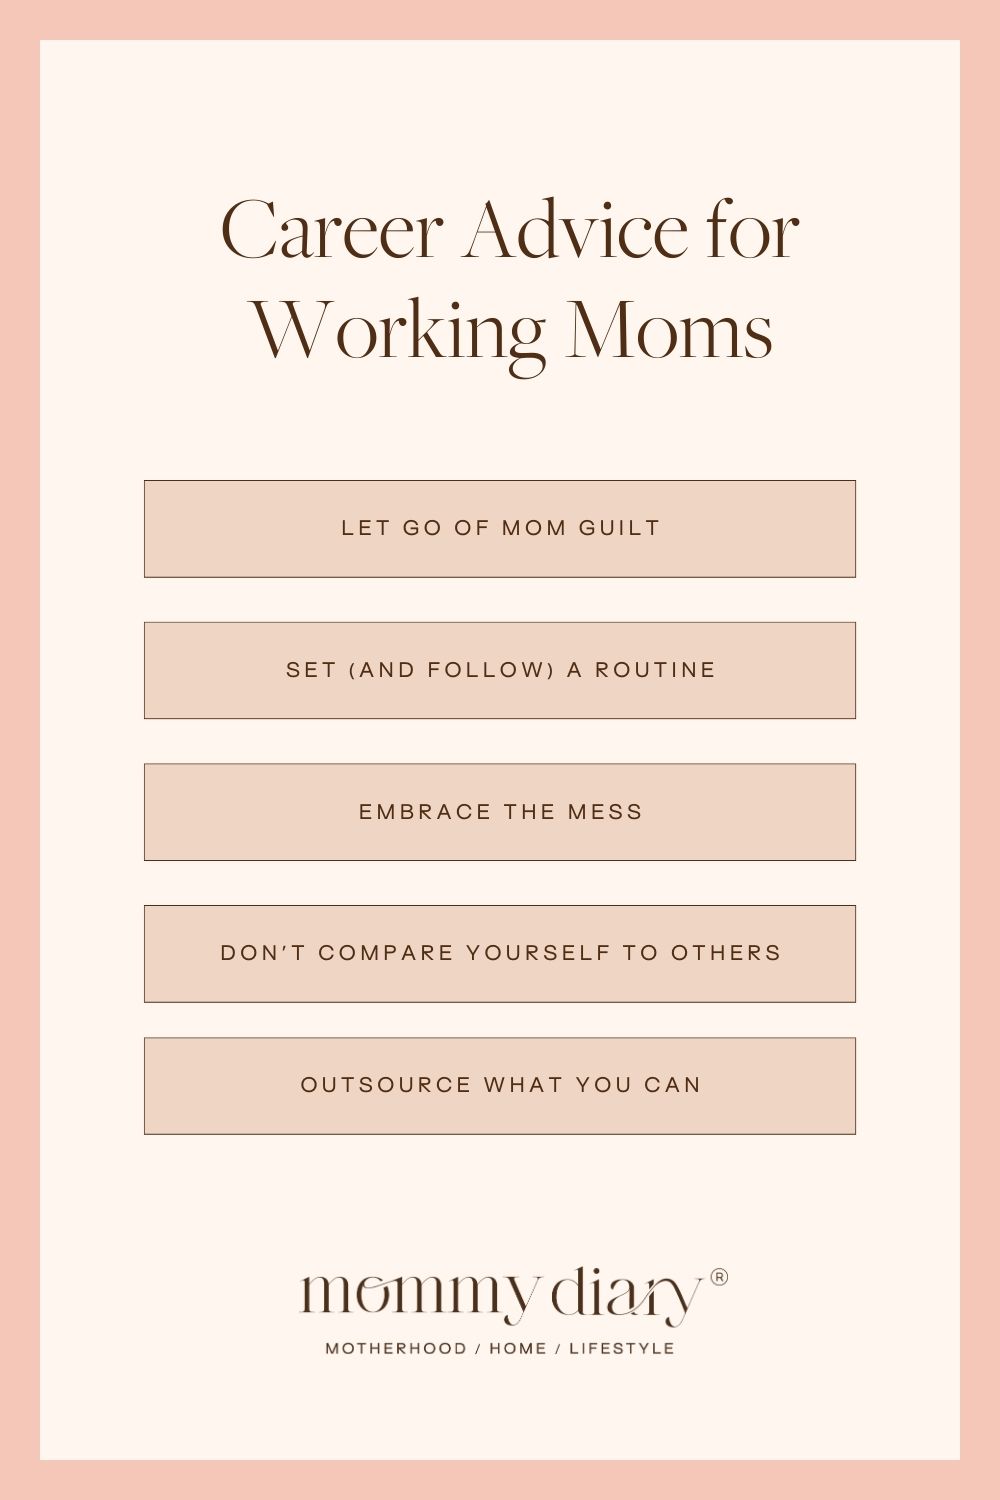 Career Advice for Working Moms